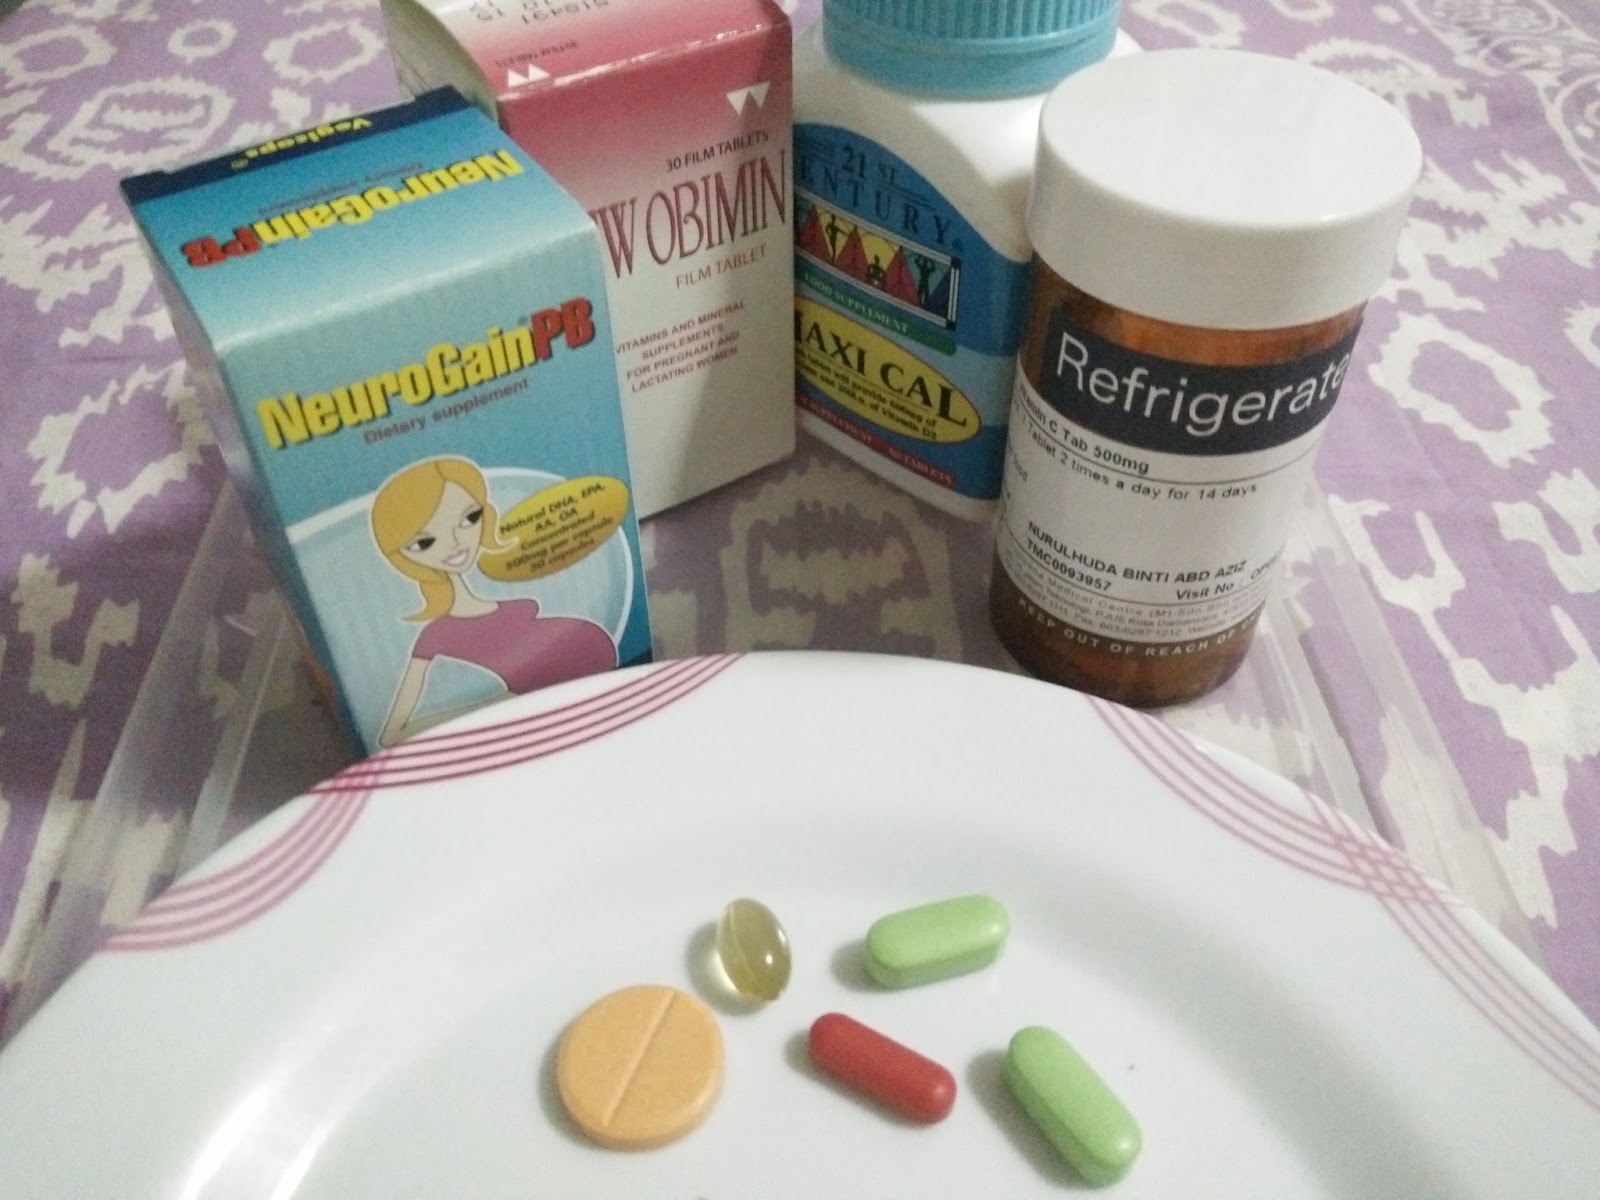 When he proposed i said yes: SUPPLEMENT DURING PREGNANCY